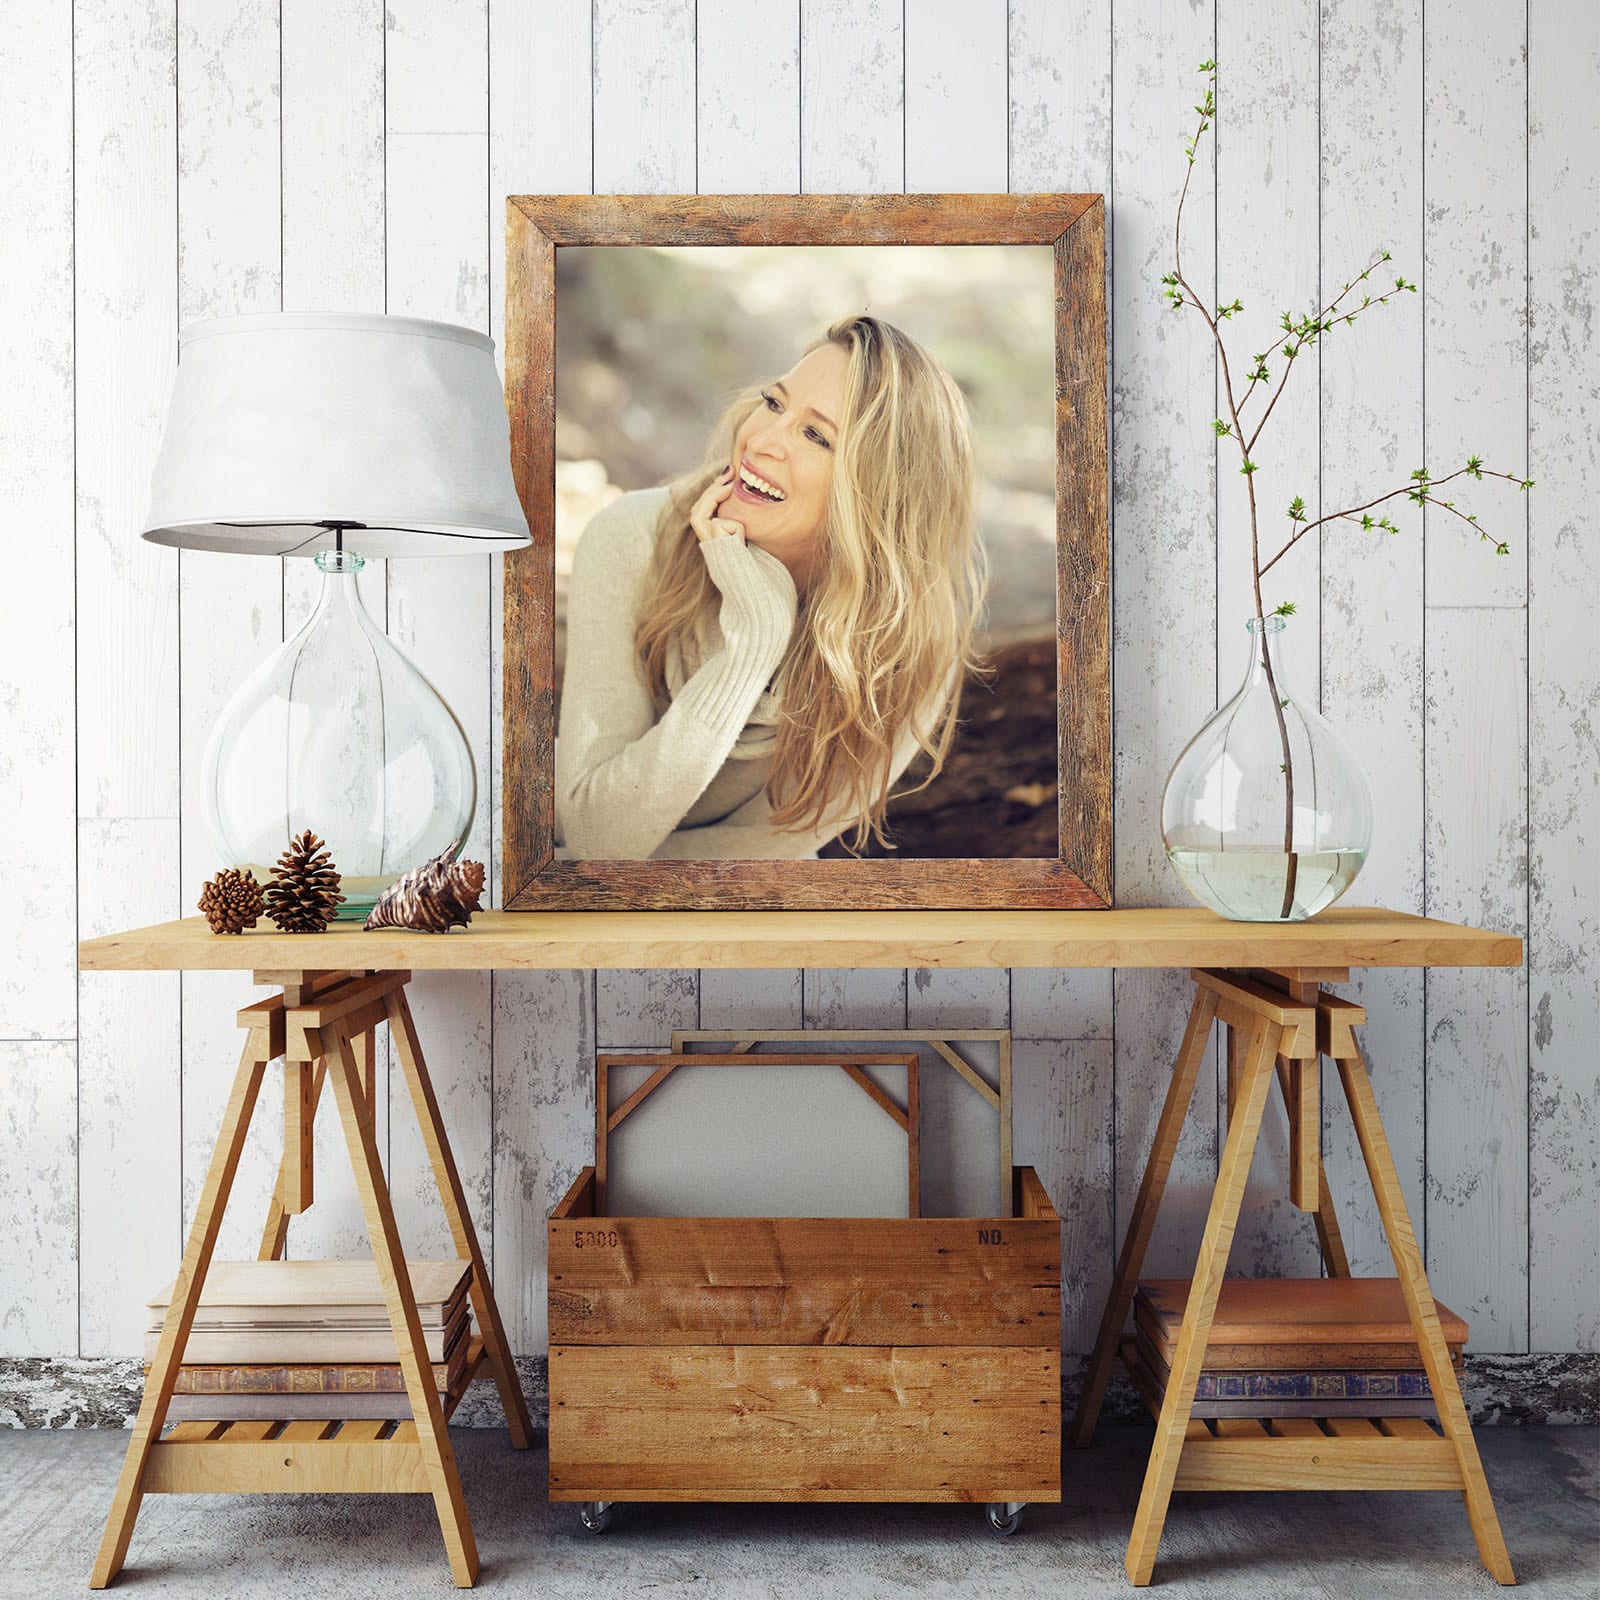 Woman's smiling lifestyle portrait in a wooden frame.